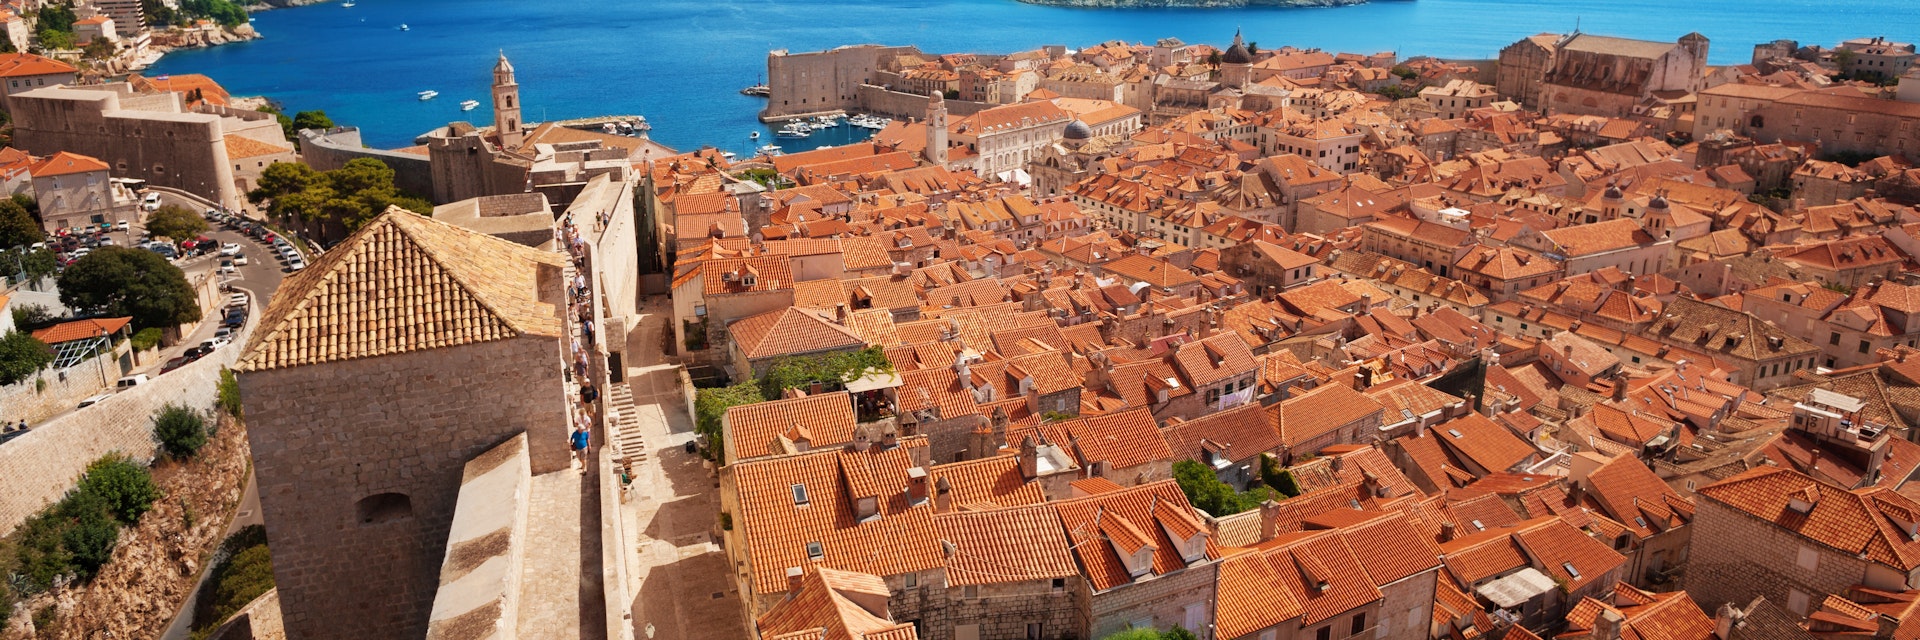 Old town of Dubrovnik with Lokrum island on background with red roofs; Shutterstock ID 151850840; Your name (First / Last): Josh Vogel; Project no. or GL code: 56530; Network activity no. or Cost Centre: Online-Design; Product or Project: 65050/7529/Josh Vogel/LP.com Destination Galleries